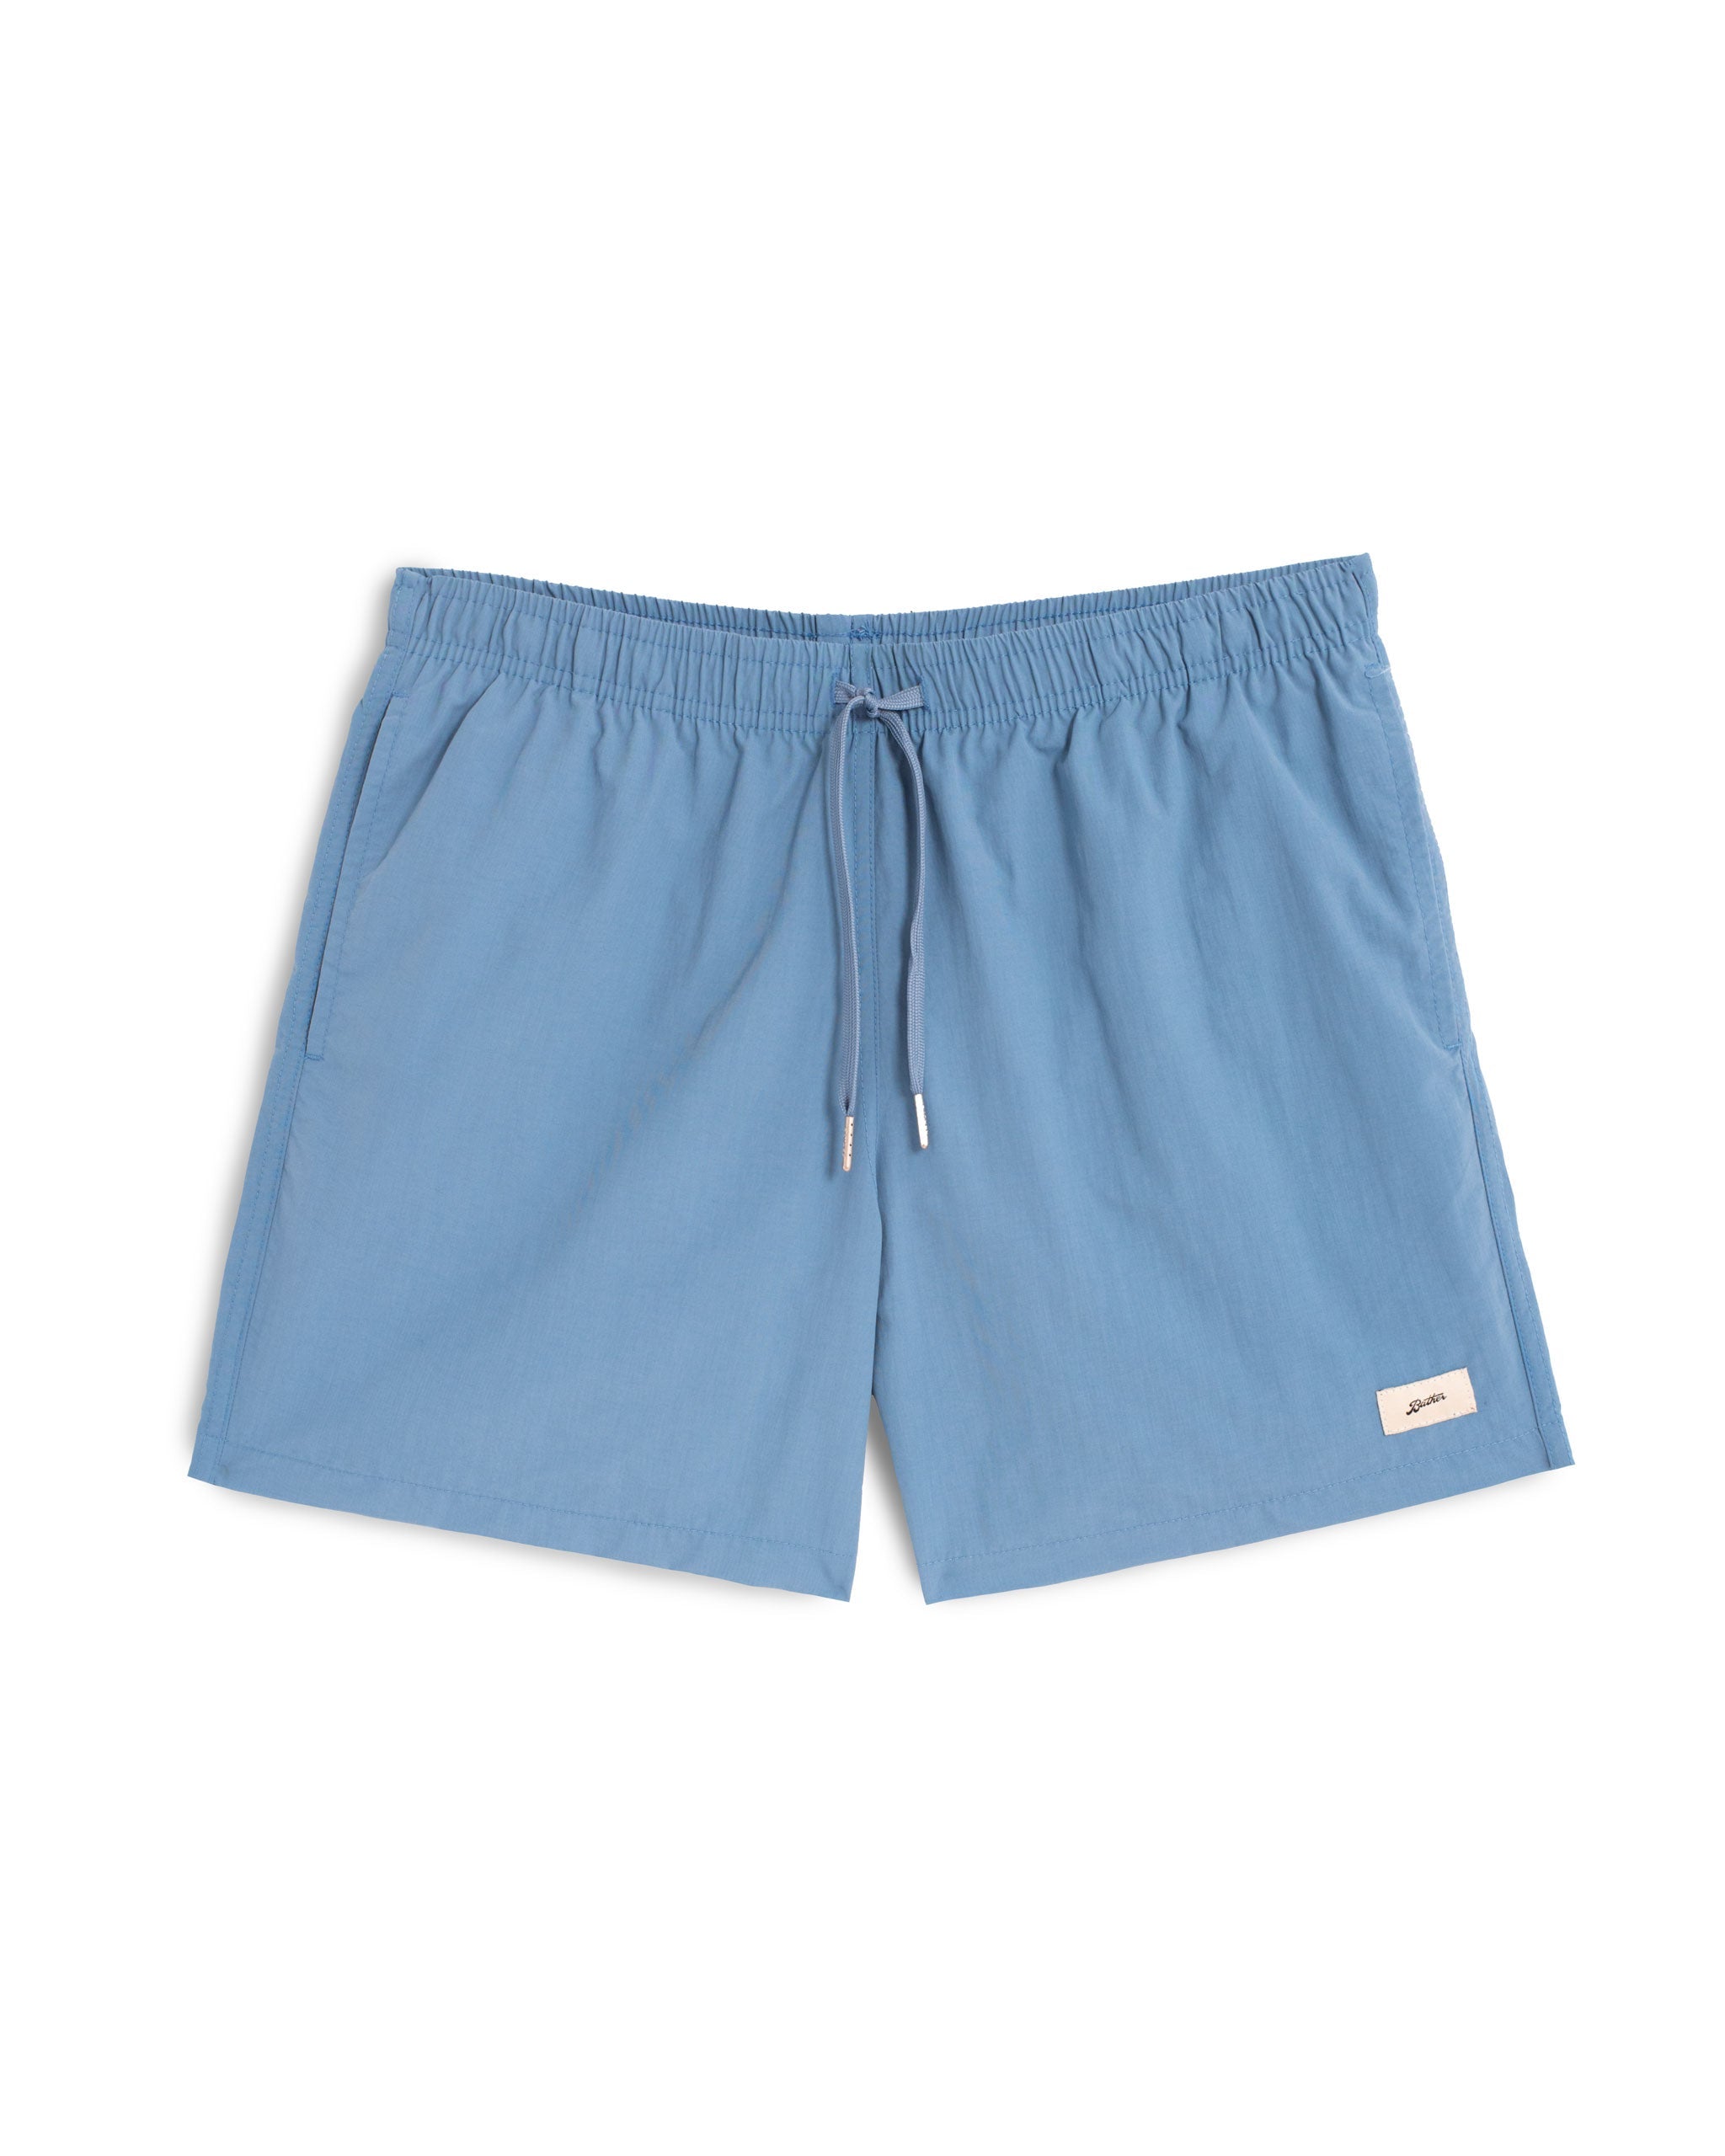 A solid blue swim trunk with matching drawstring